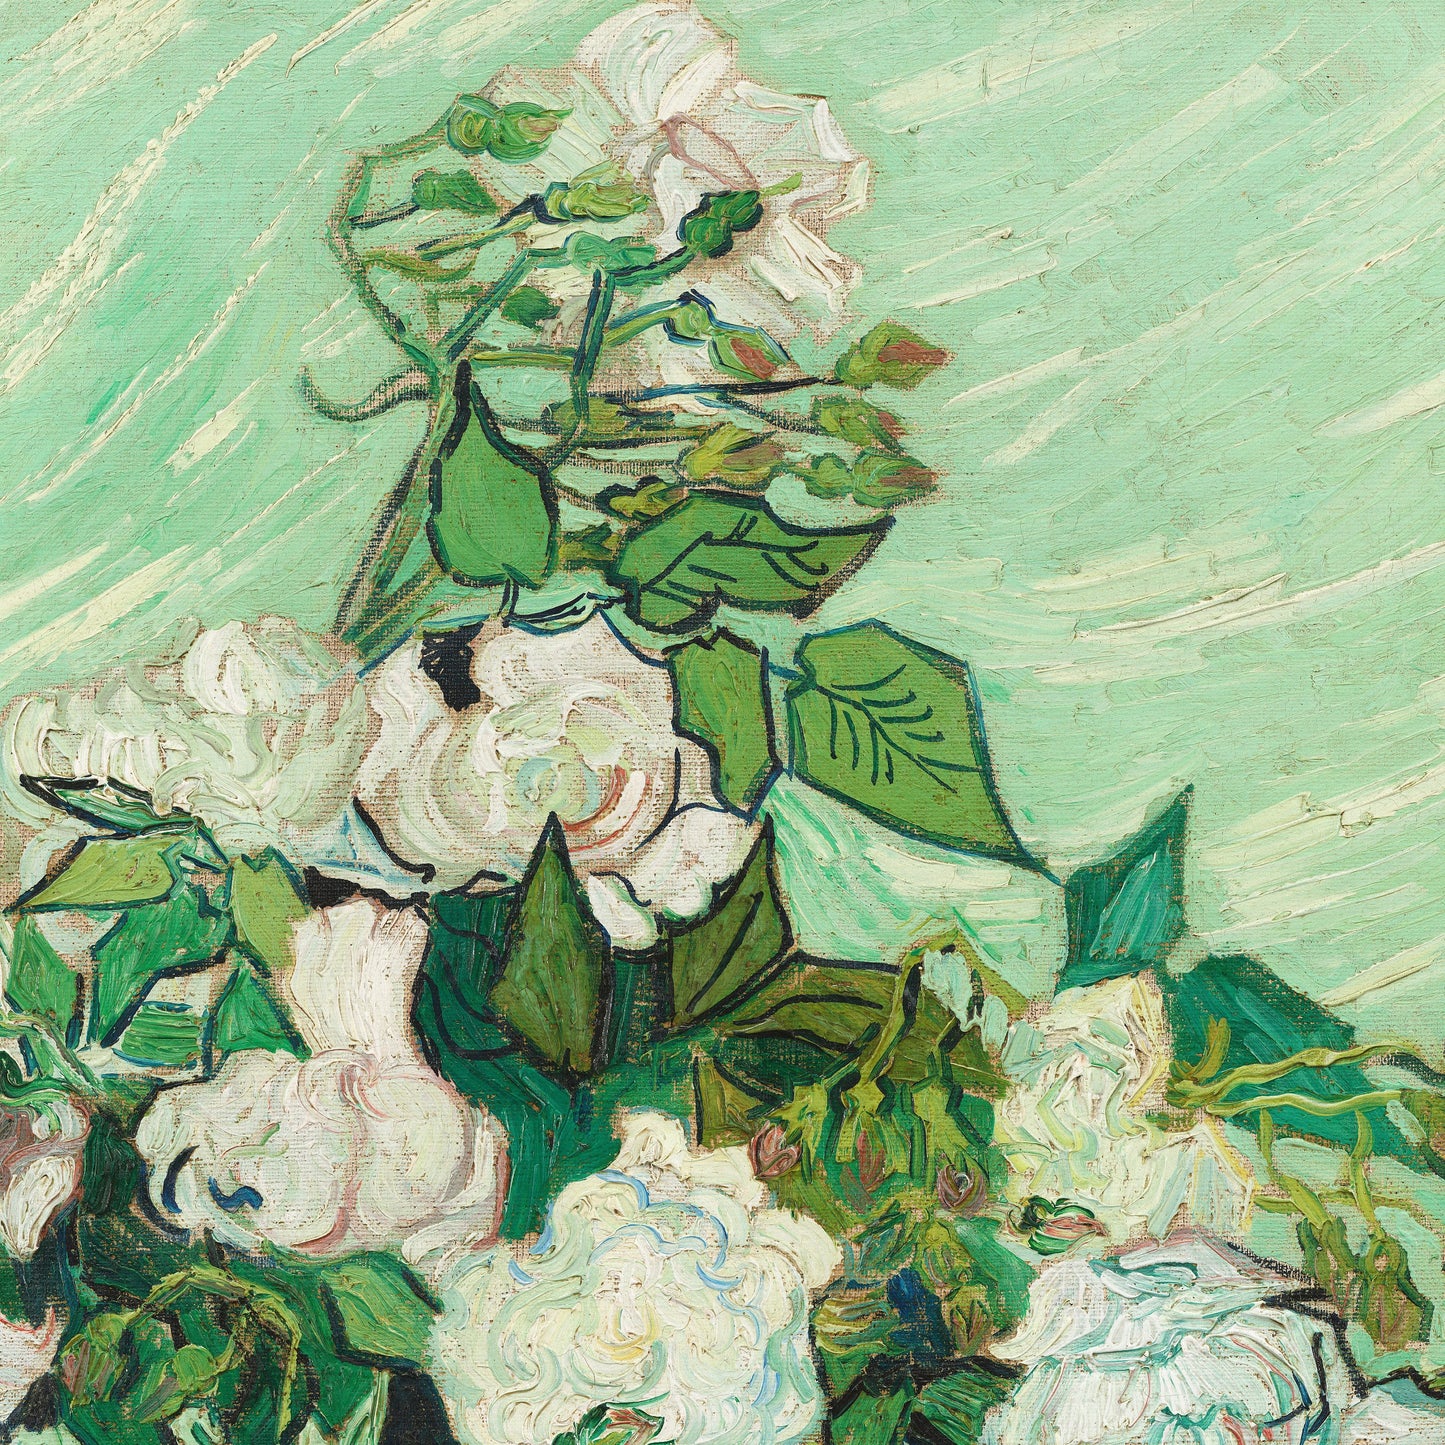 Roses by Vincent Van Gogh, 3d Printed with texture and brush strokes looks like original oil-painting, code:062